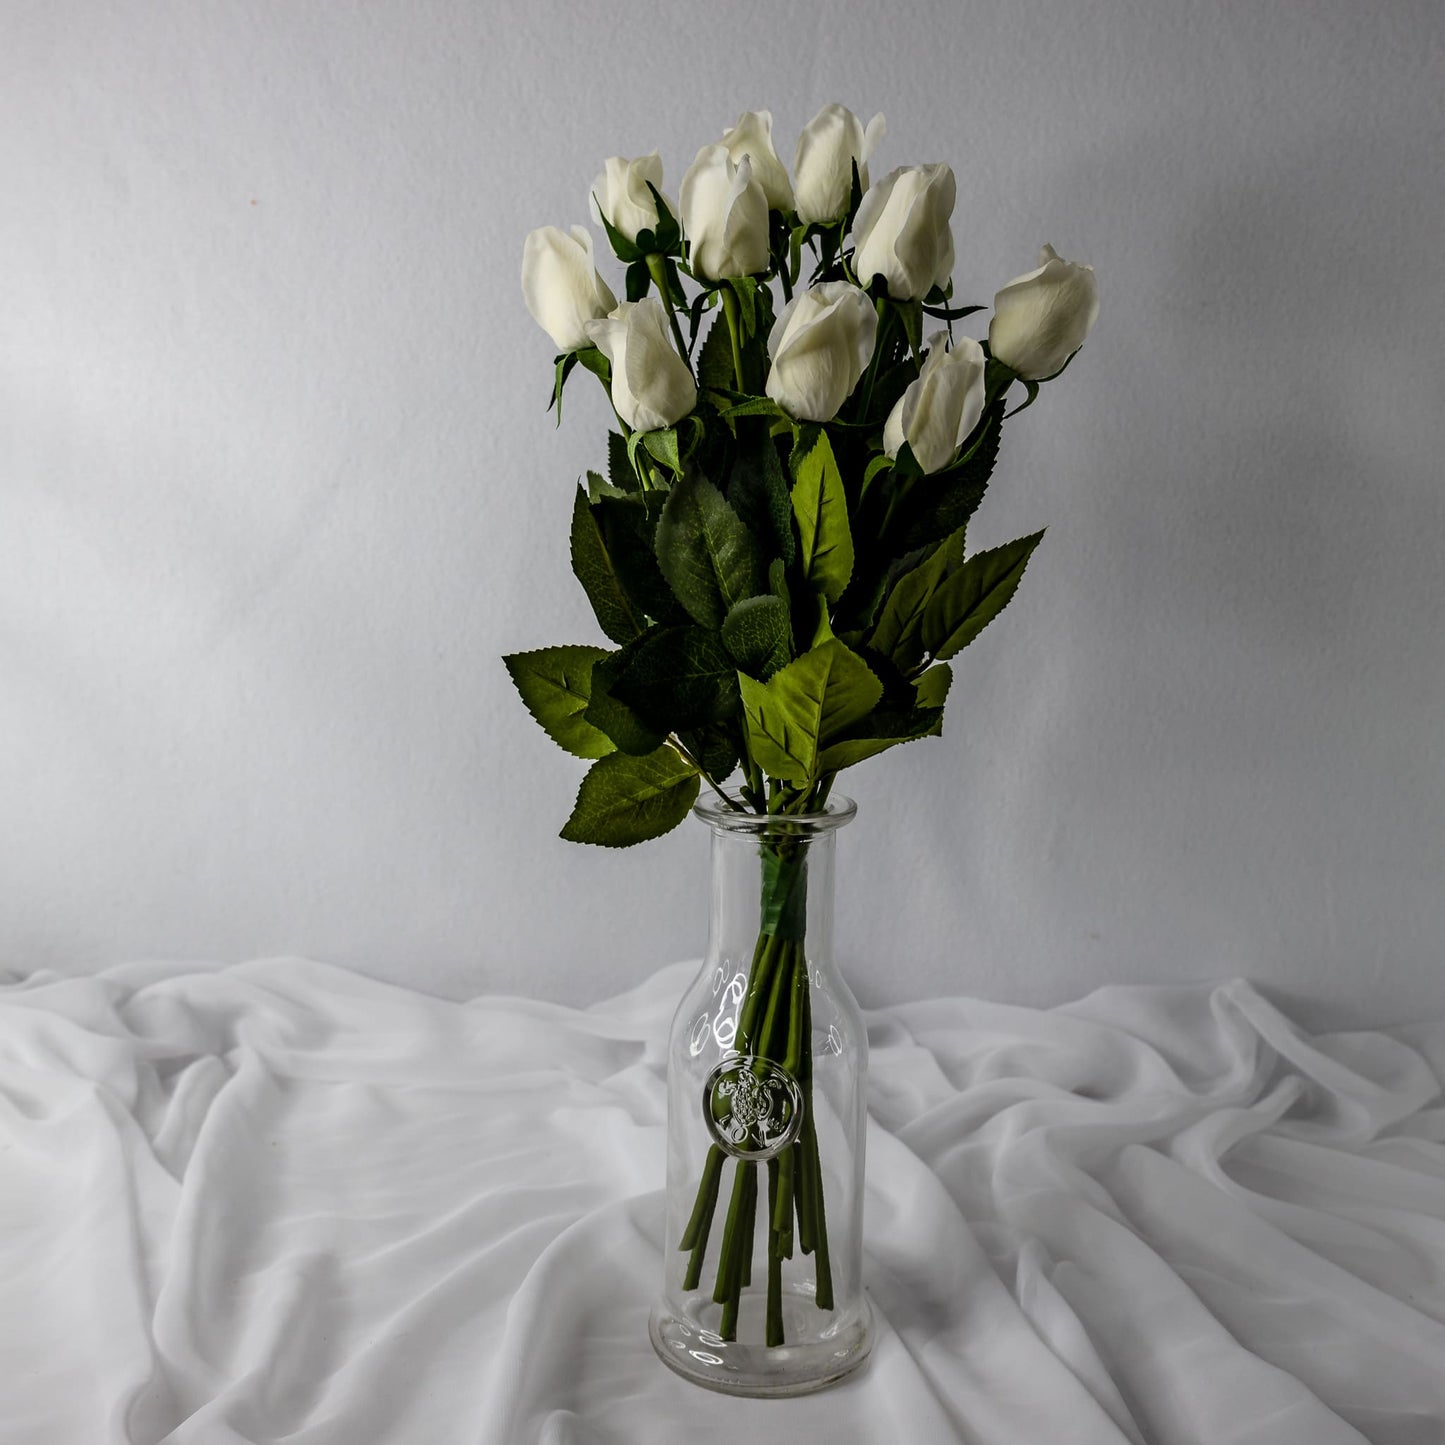 artificial white real touch rose buds placed transparent glass vase